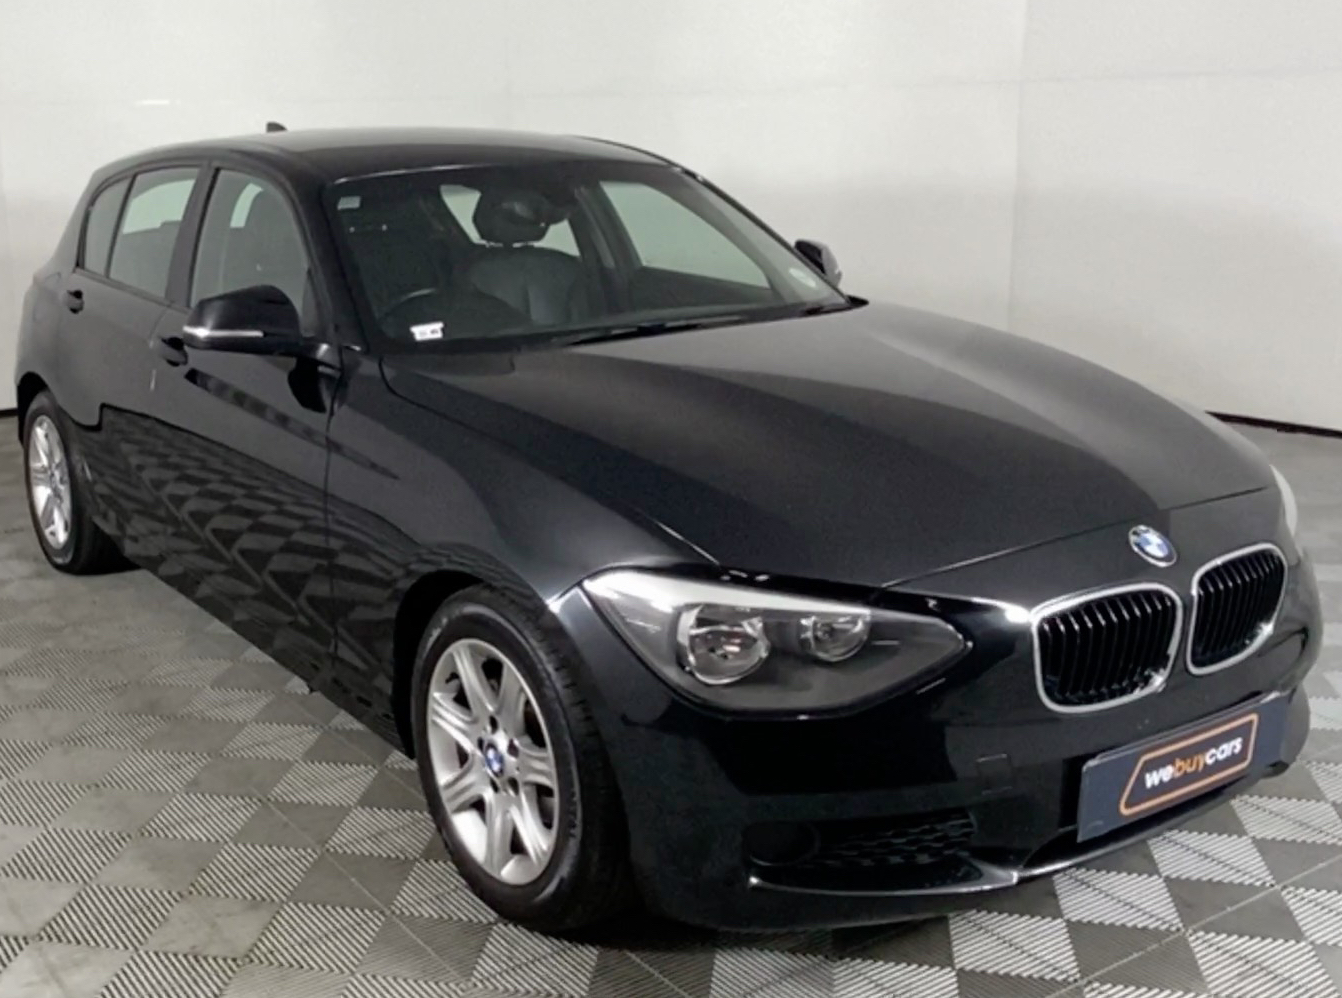 Used 2012 BMW 1 Series 116i 5Door (F20) for sale WeBuyCars